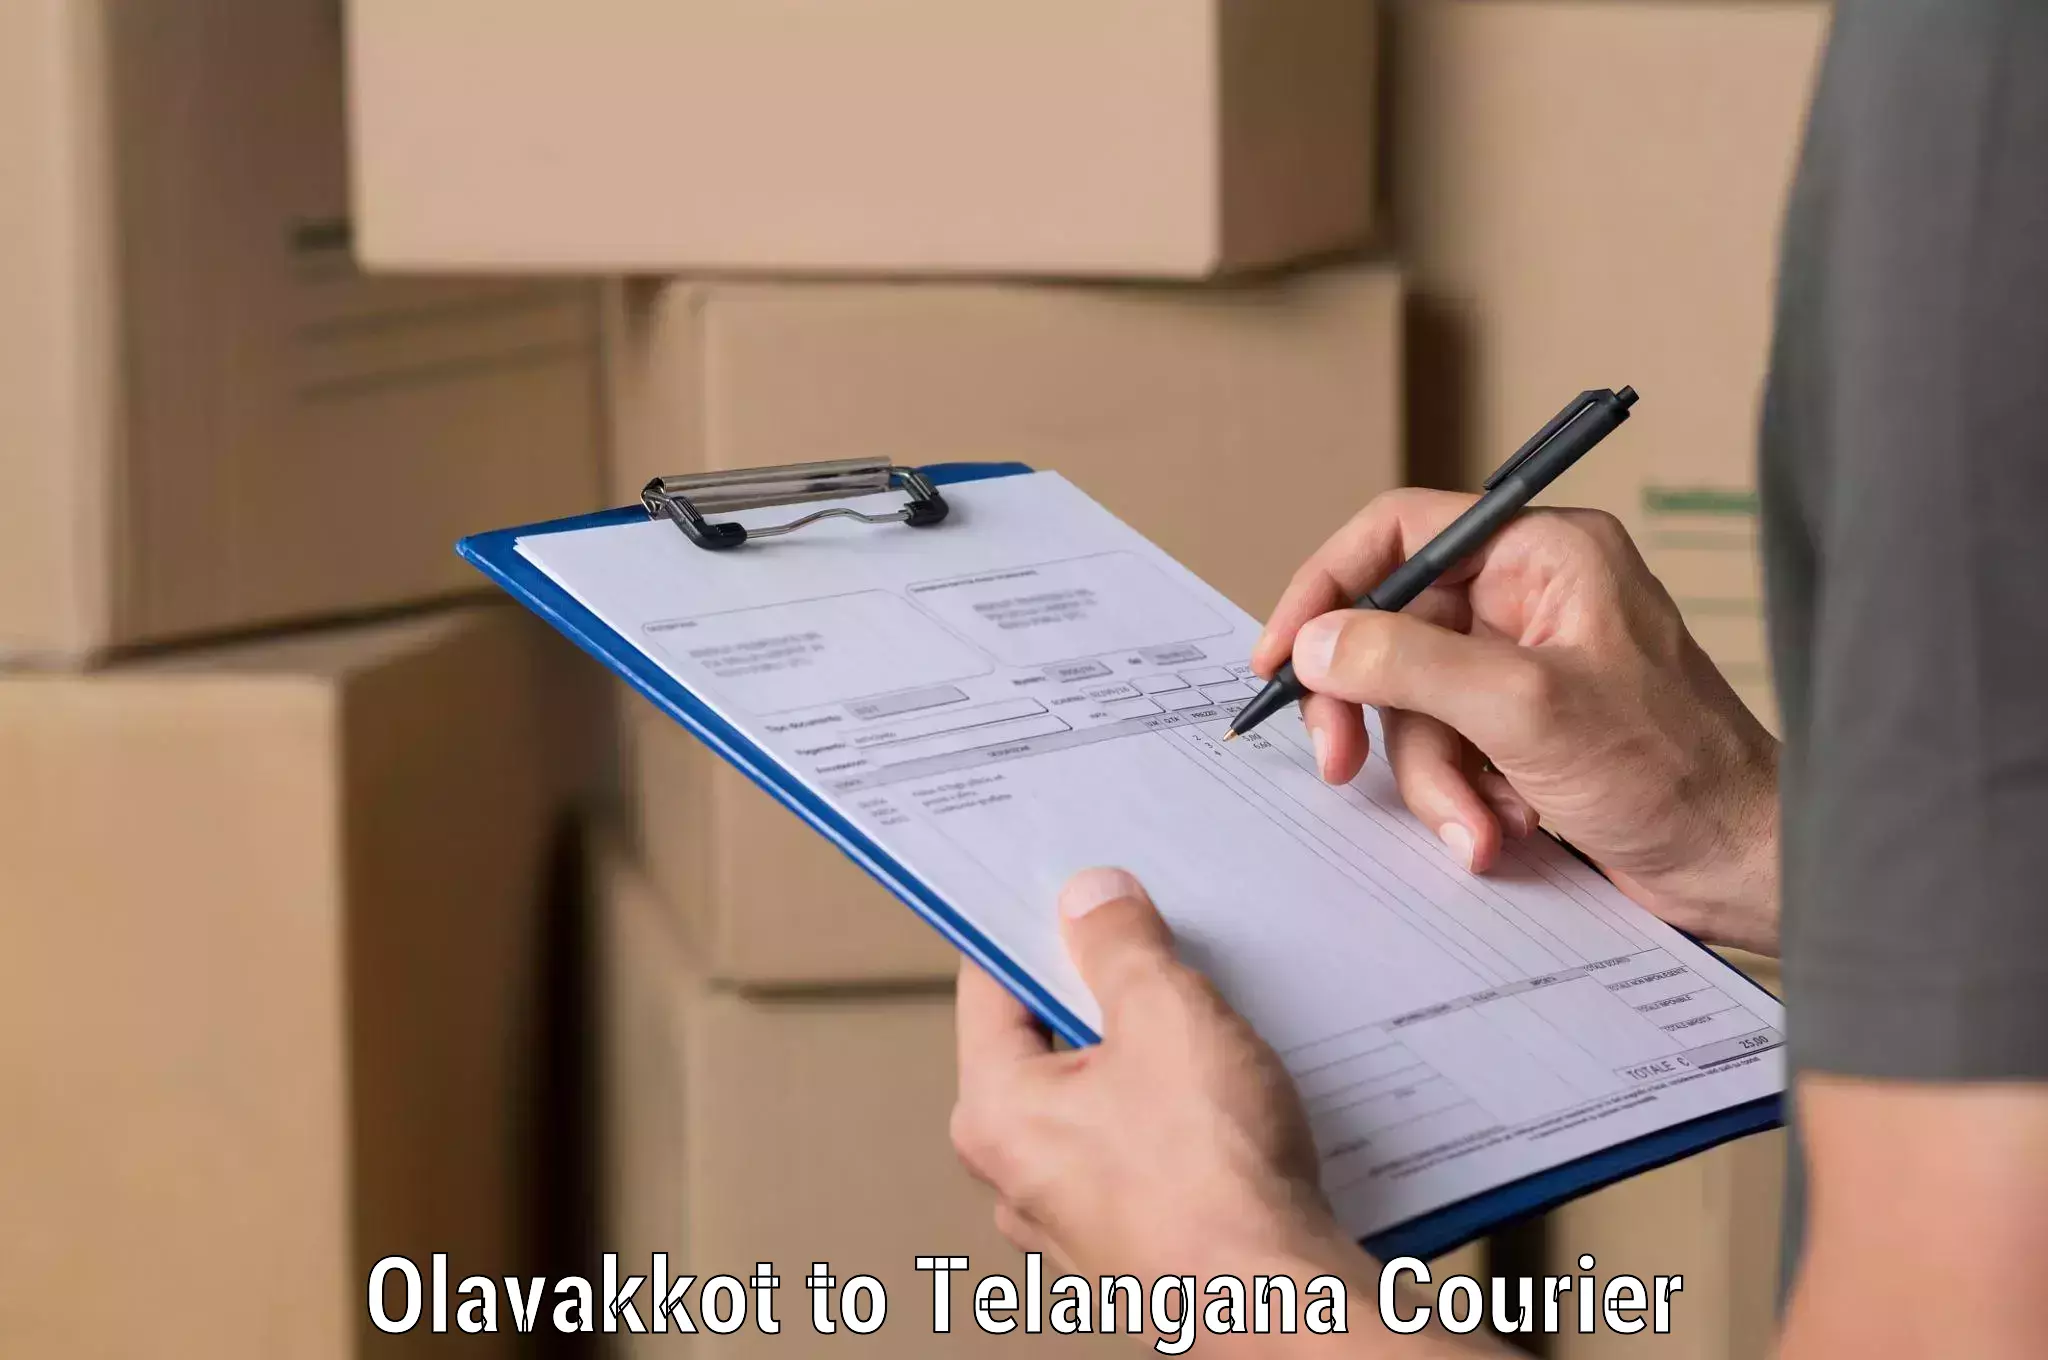 Courier service booking Olavakkot to Sathupally